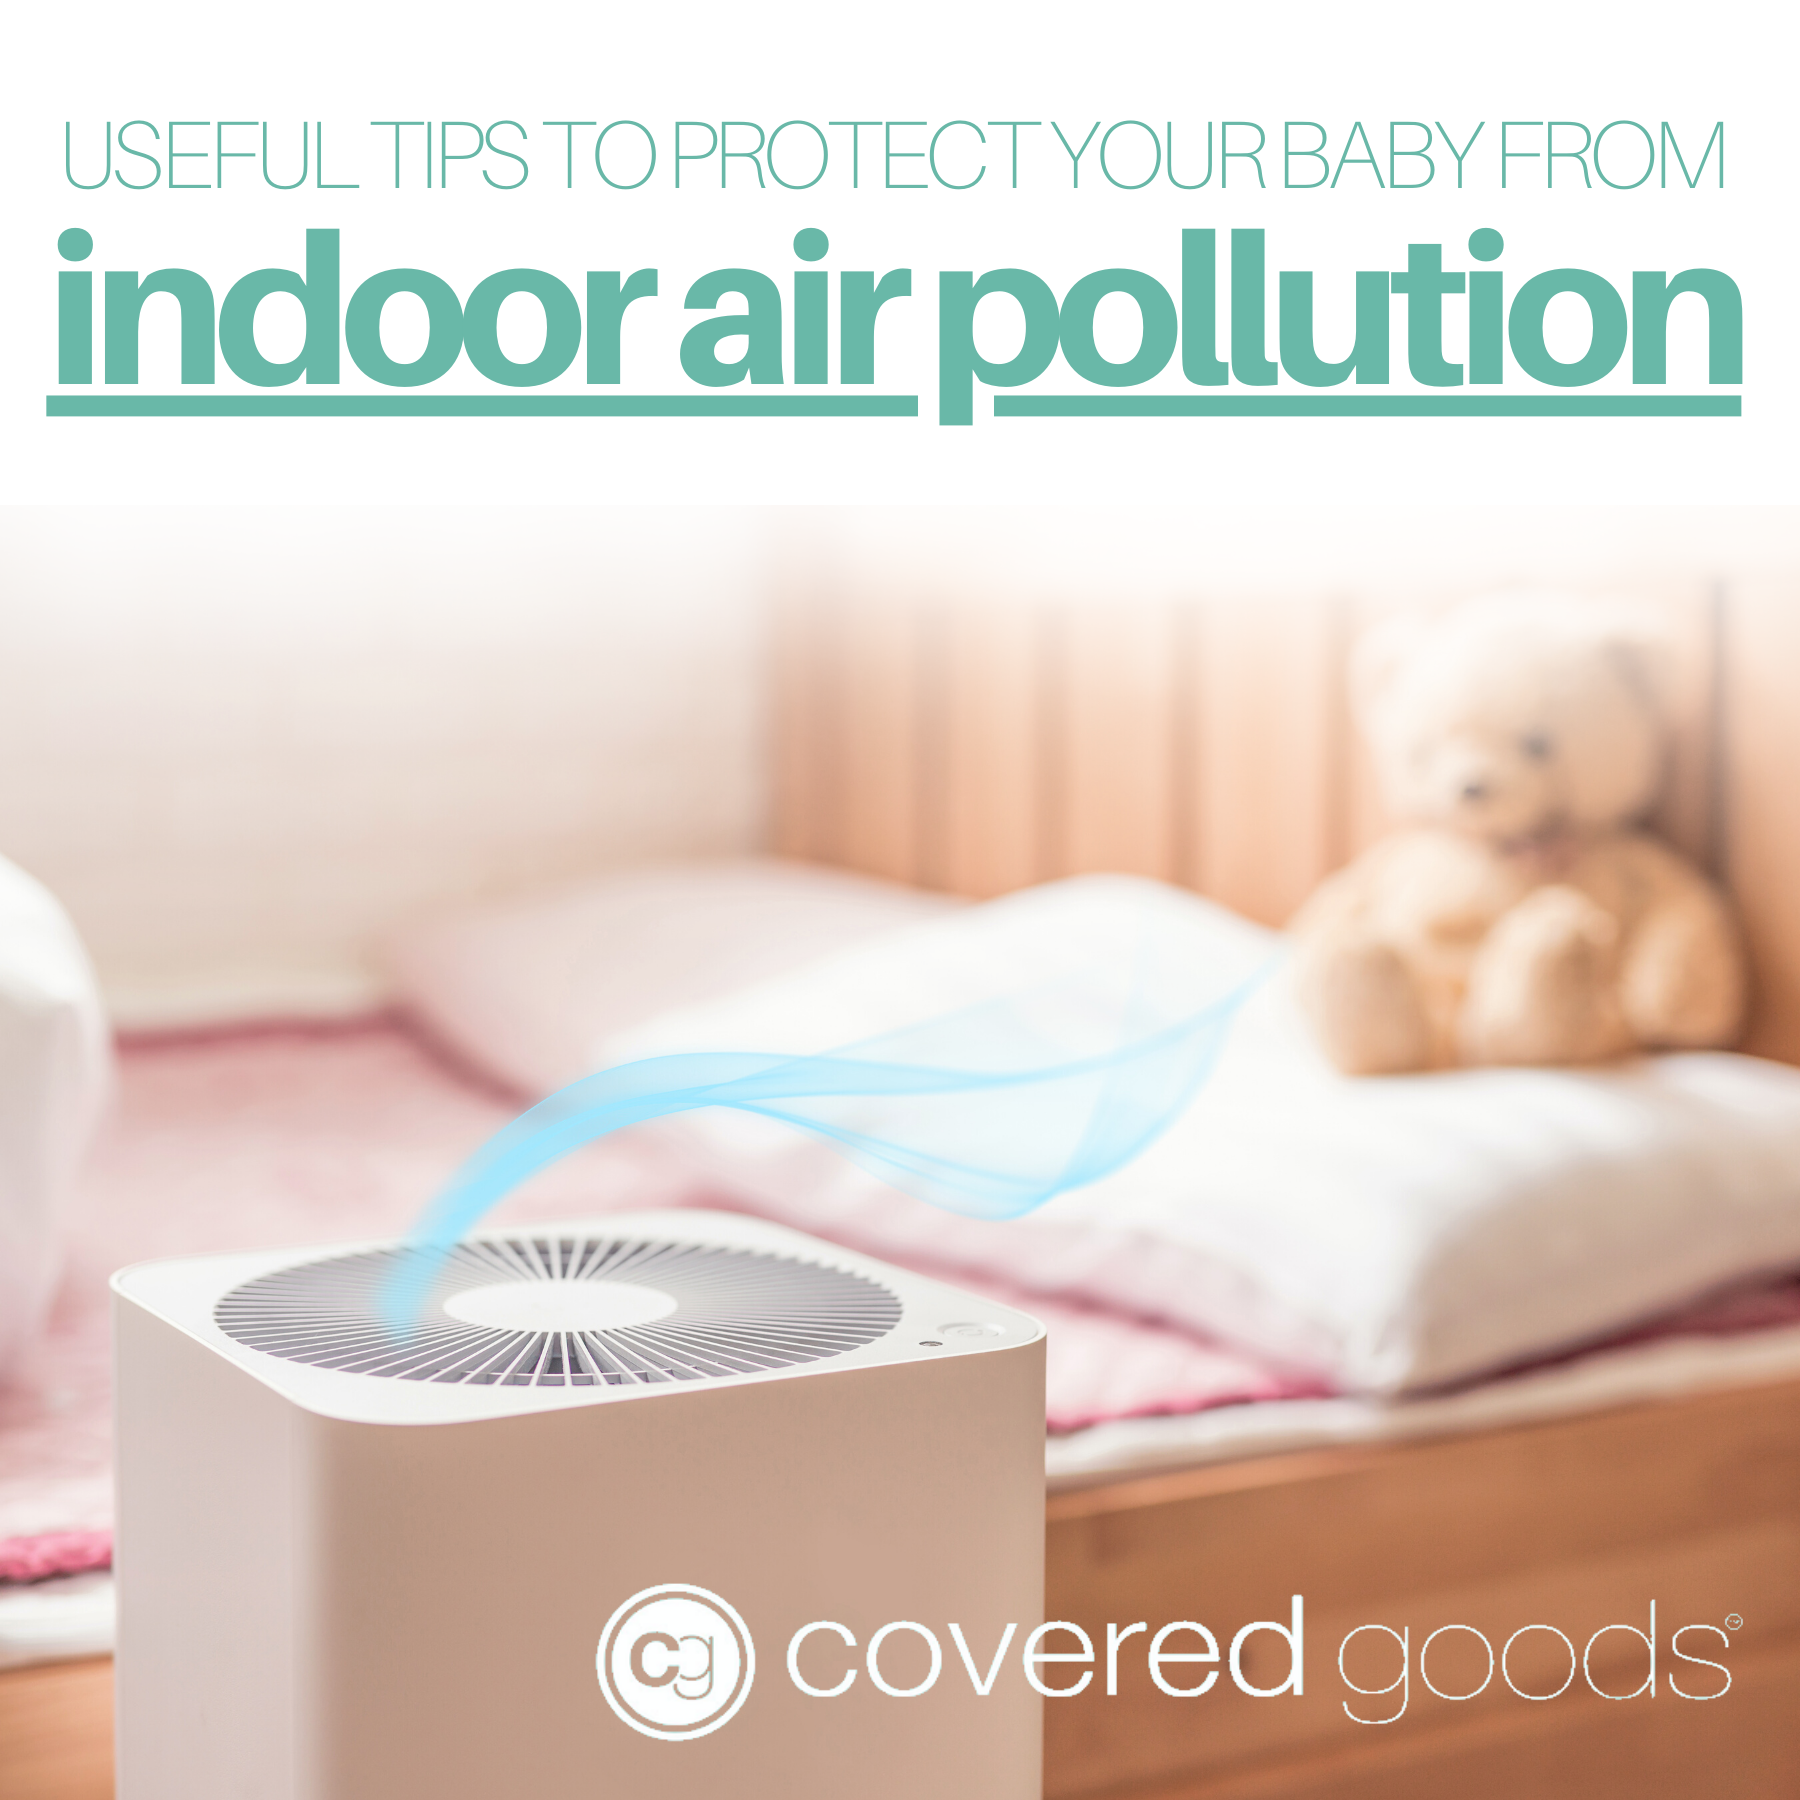 Useful Tips to Protect Your Baby from Indoor Air Pollution